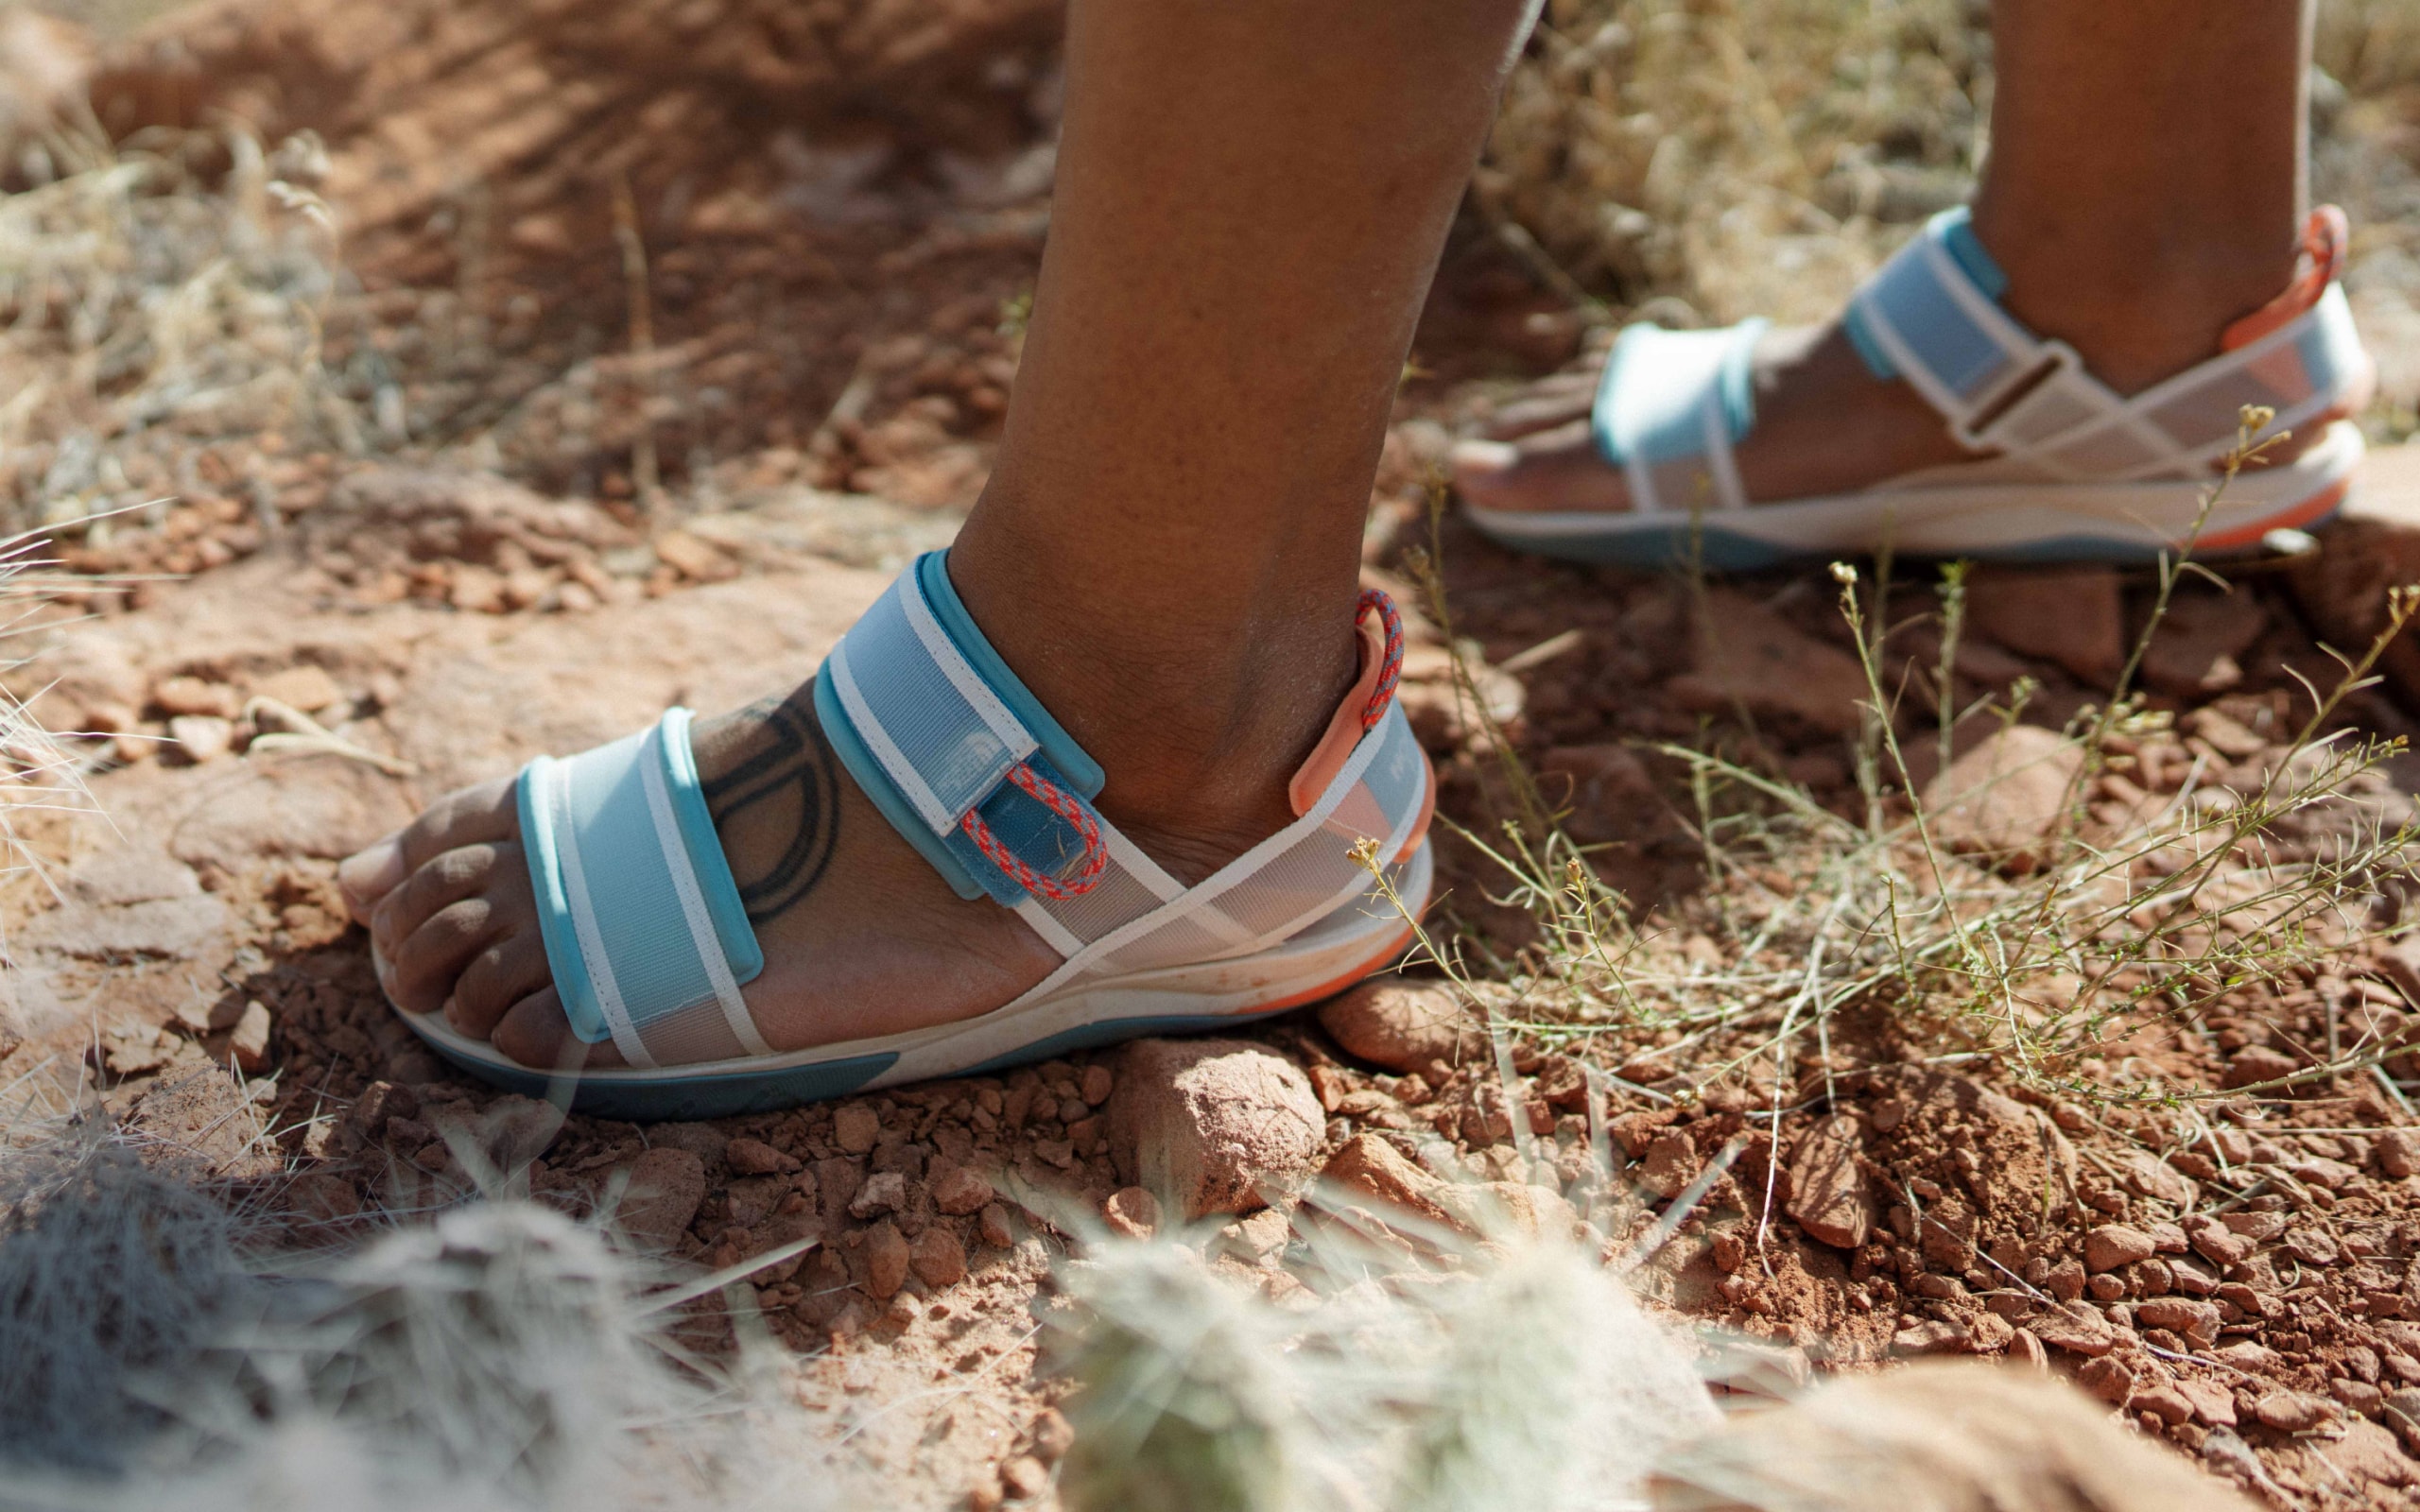 A close-up of a hiker walking through a desert landscape wearing sandals from The North Face.